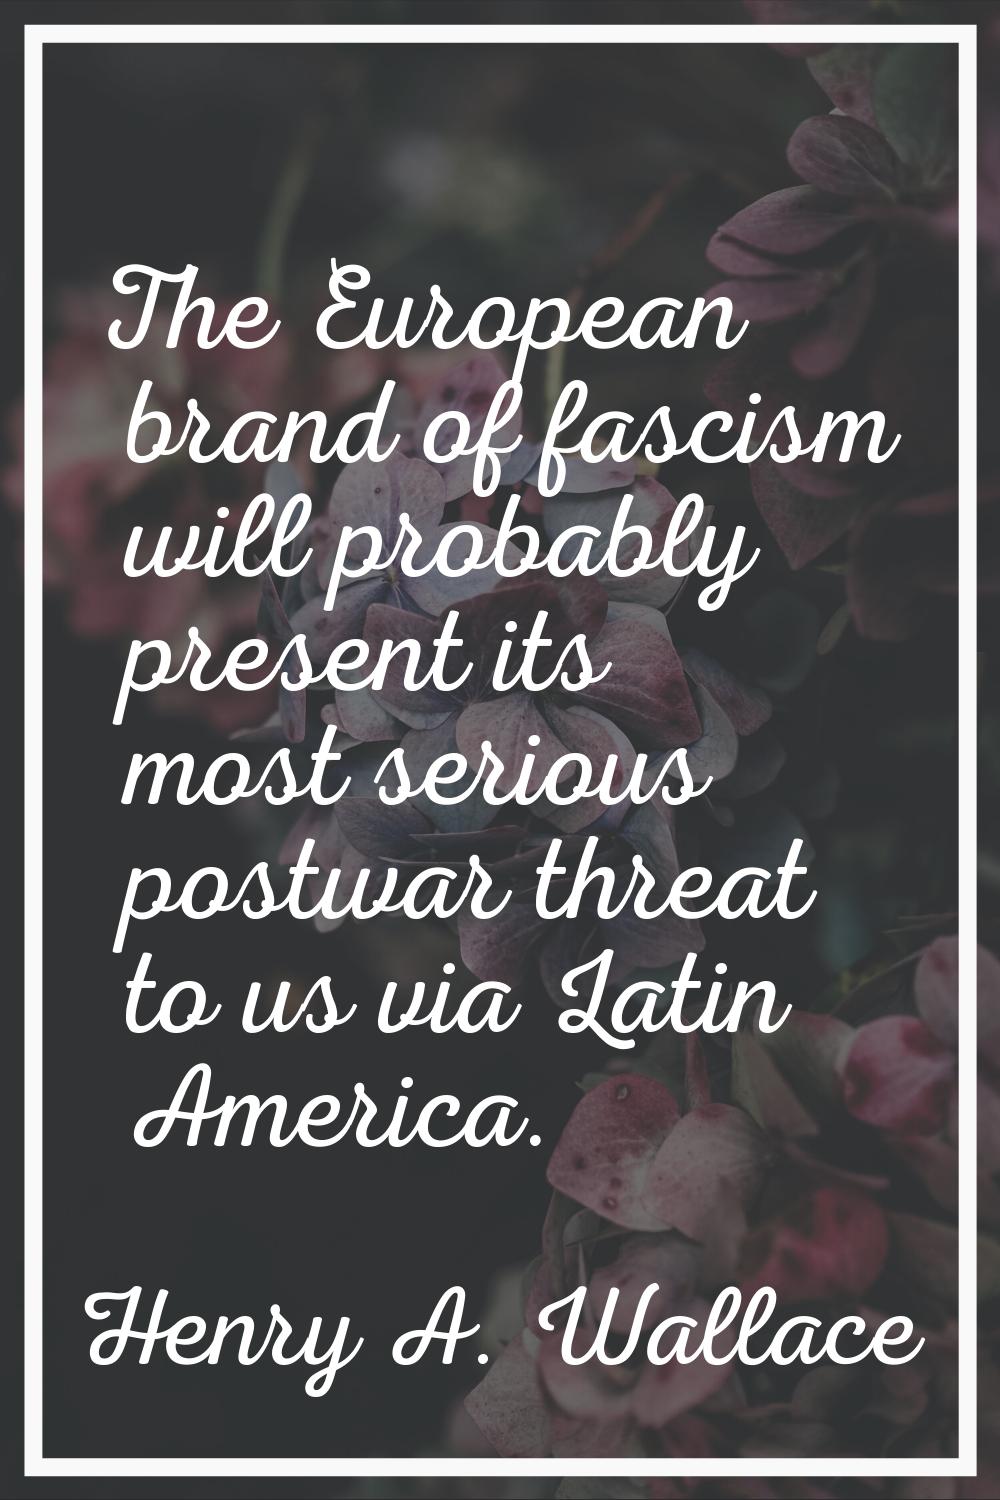 The European brand of fascism will probably present its most serious postwar threat to us via Latin